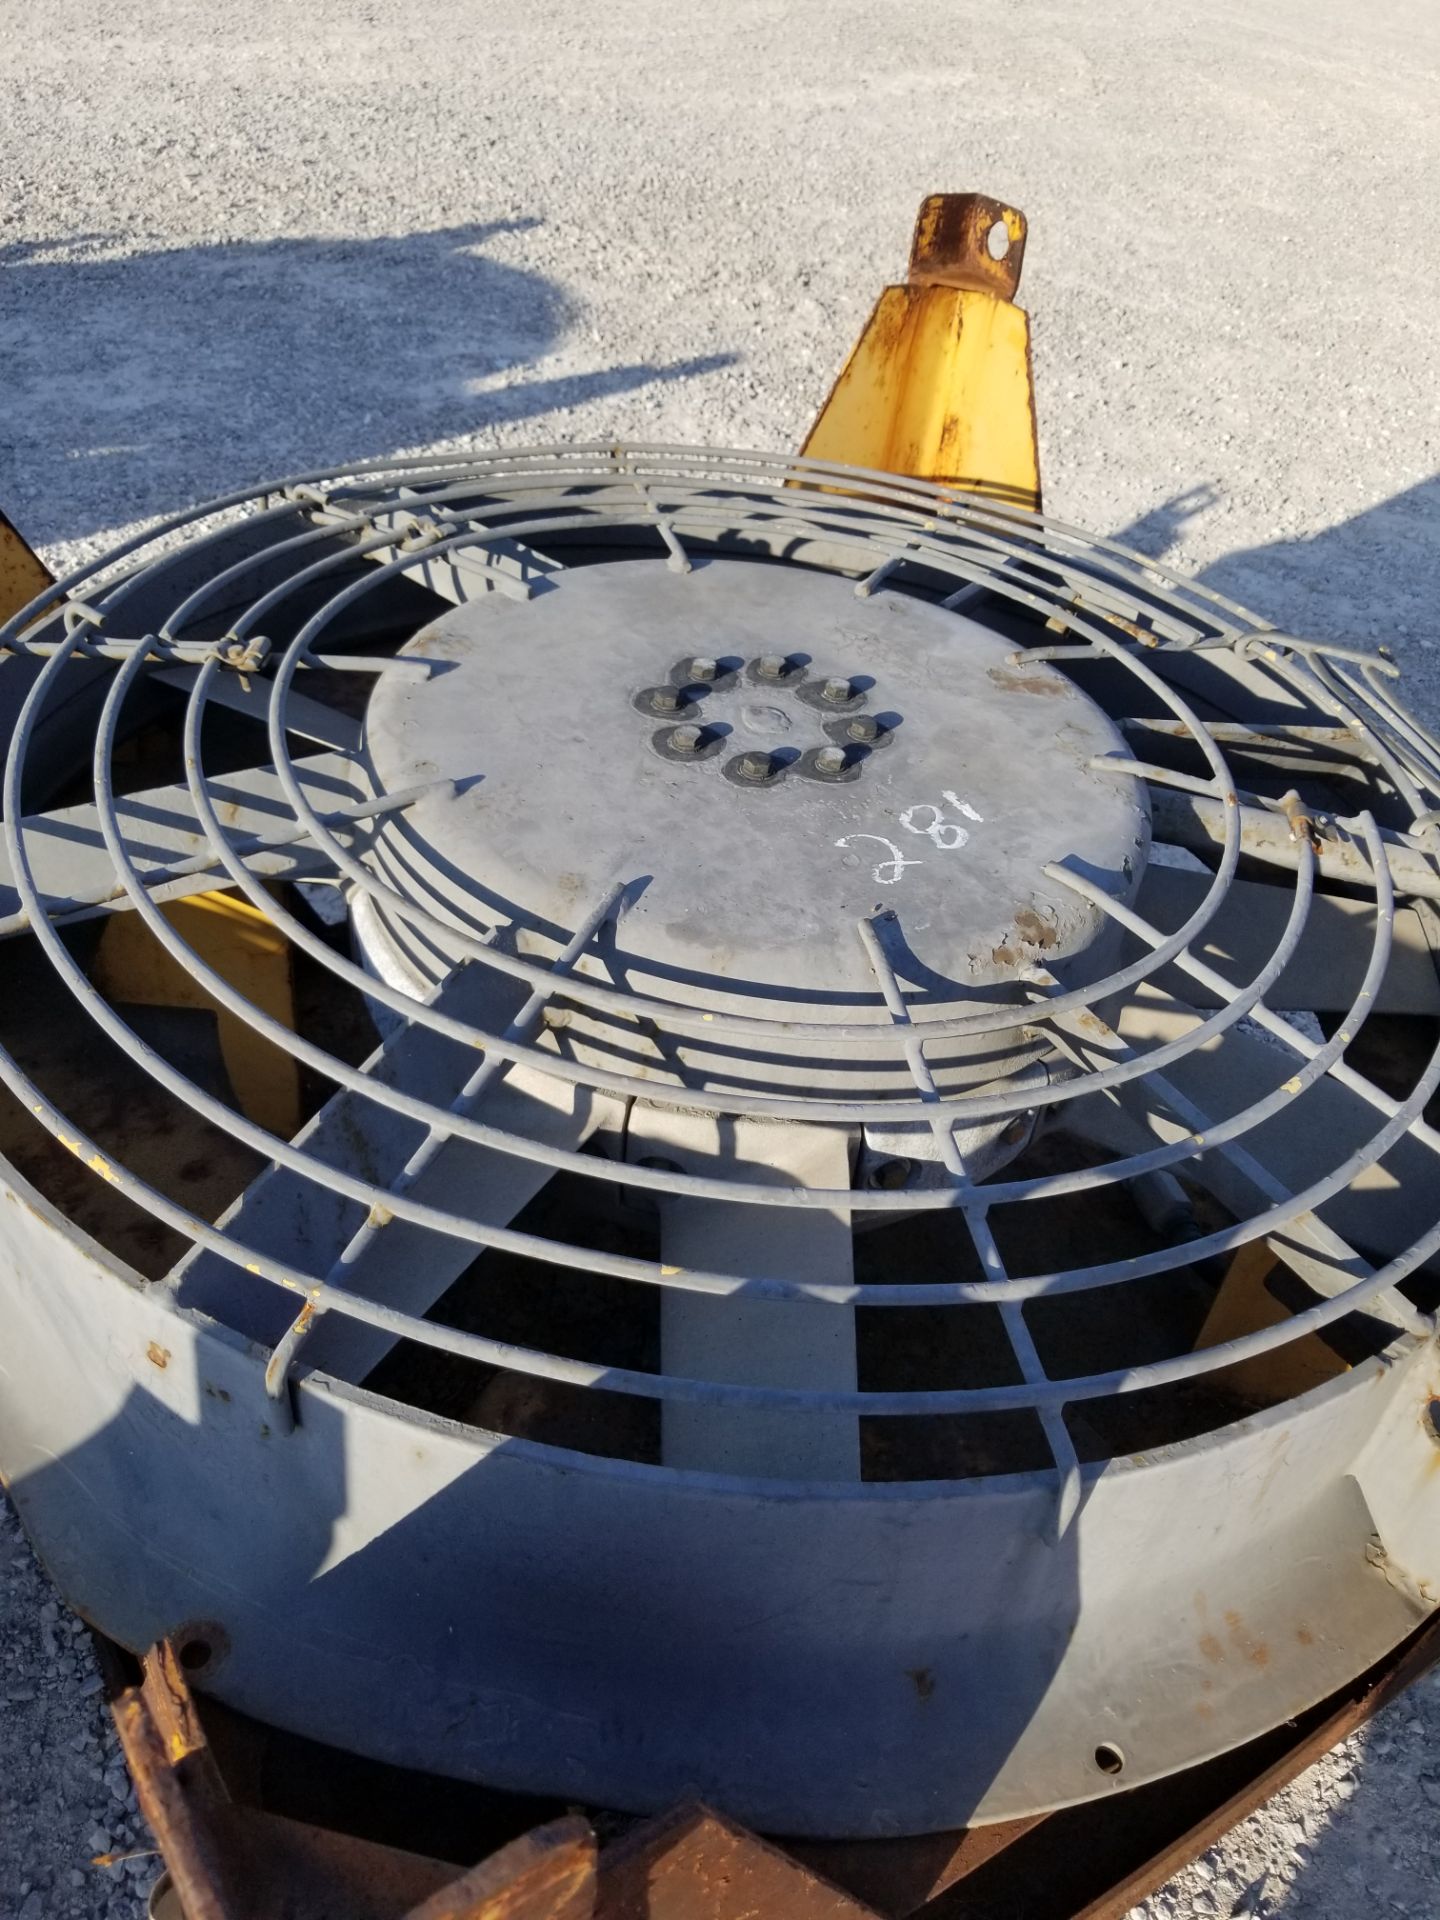 Pallet with a GE Grid Blower Motor, Q Type